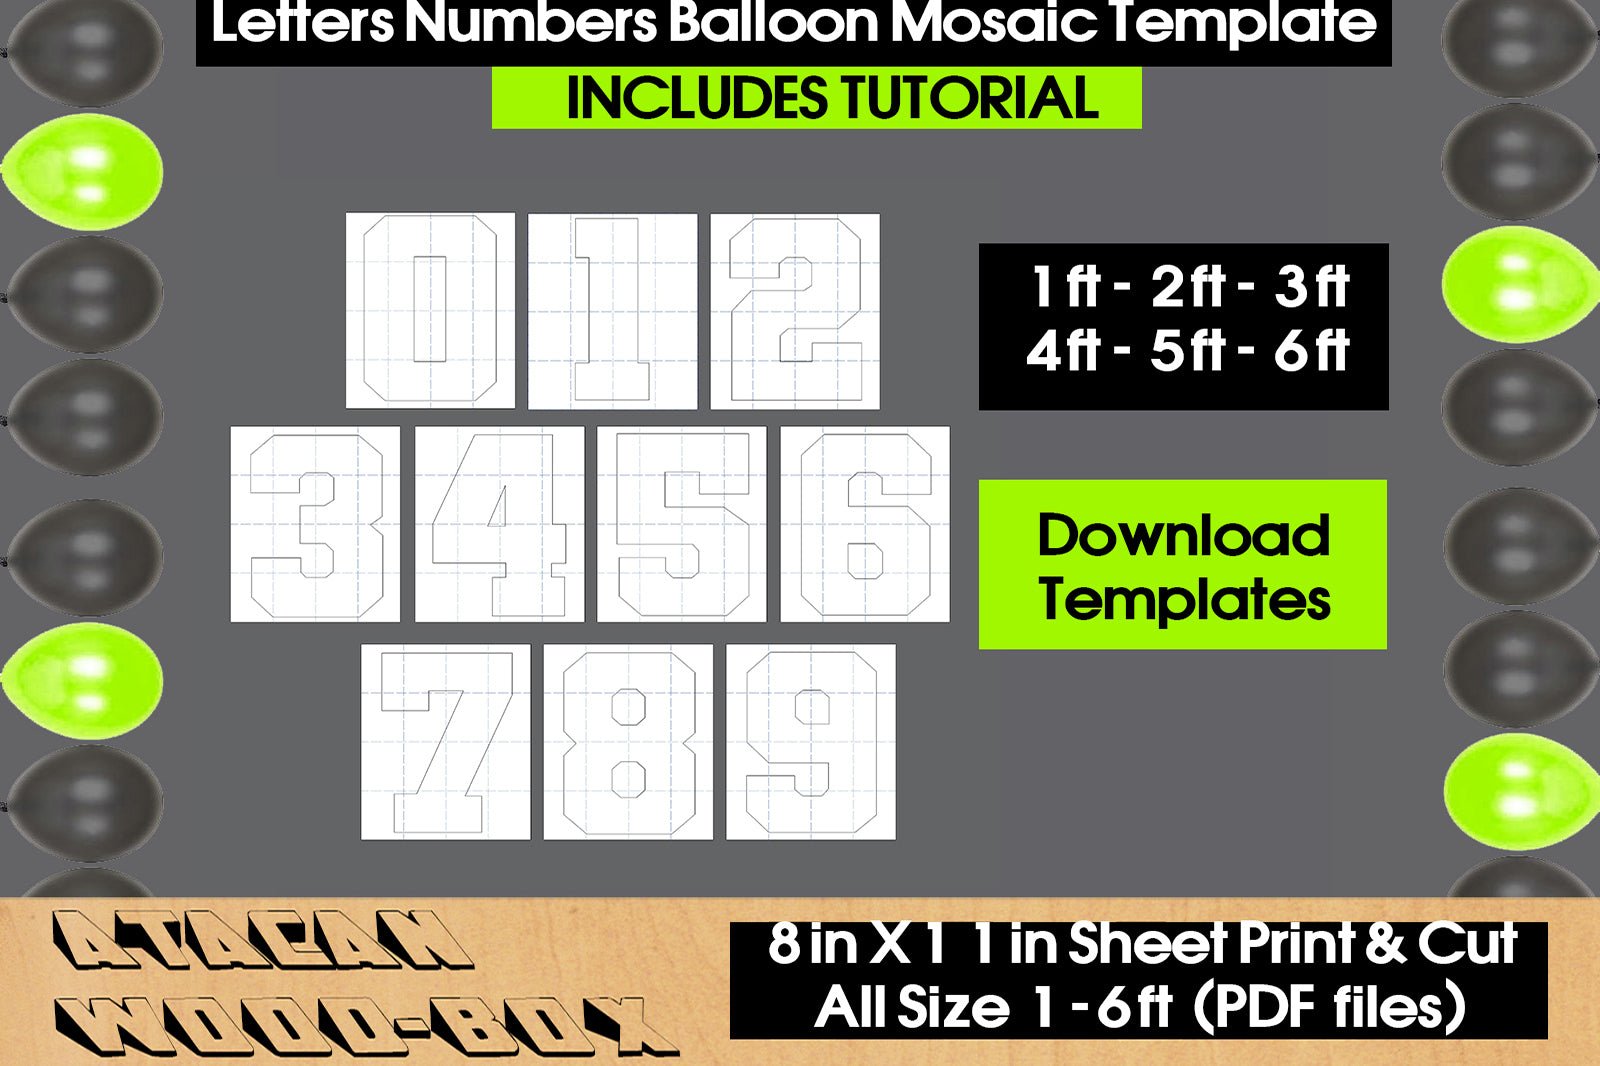 Mosaic Balloons Templates / Square Letters and Numbers 1-6ft All size SVG DXF Ai CDR 334